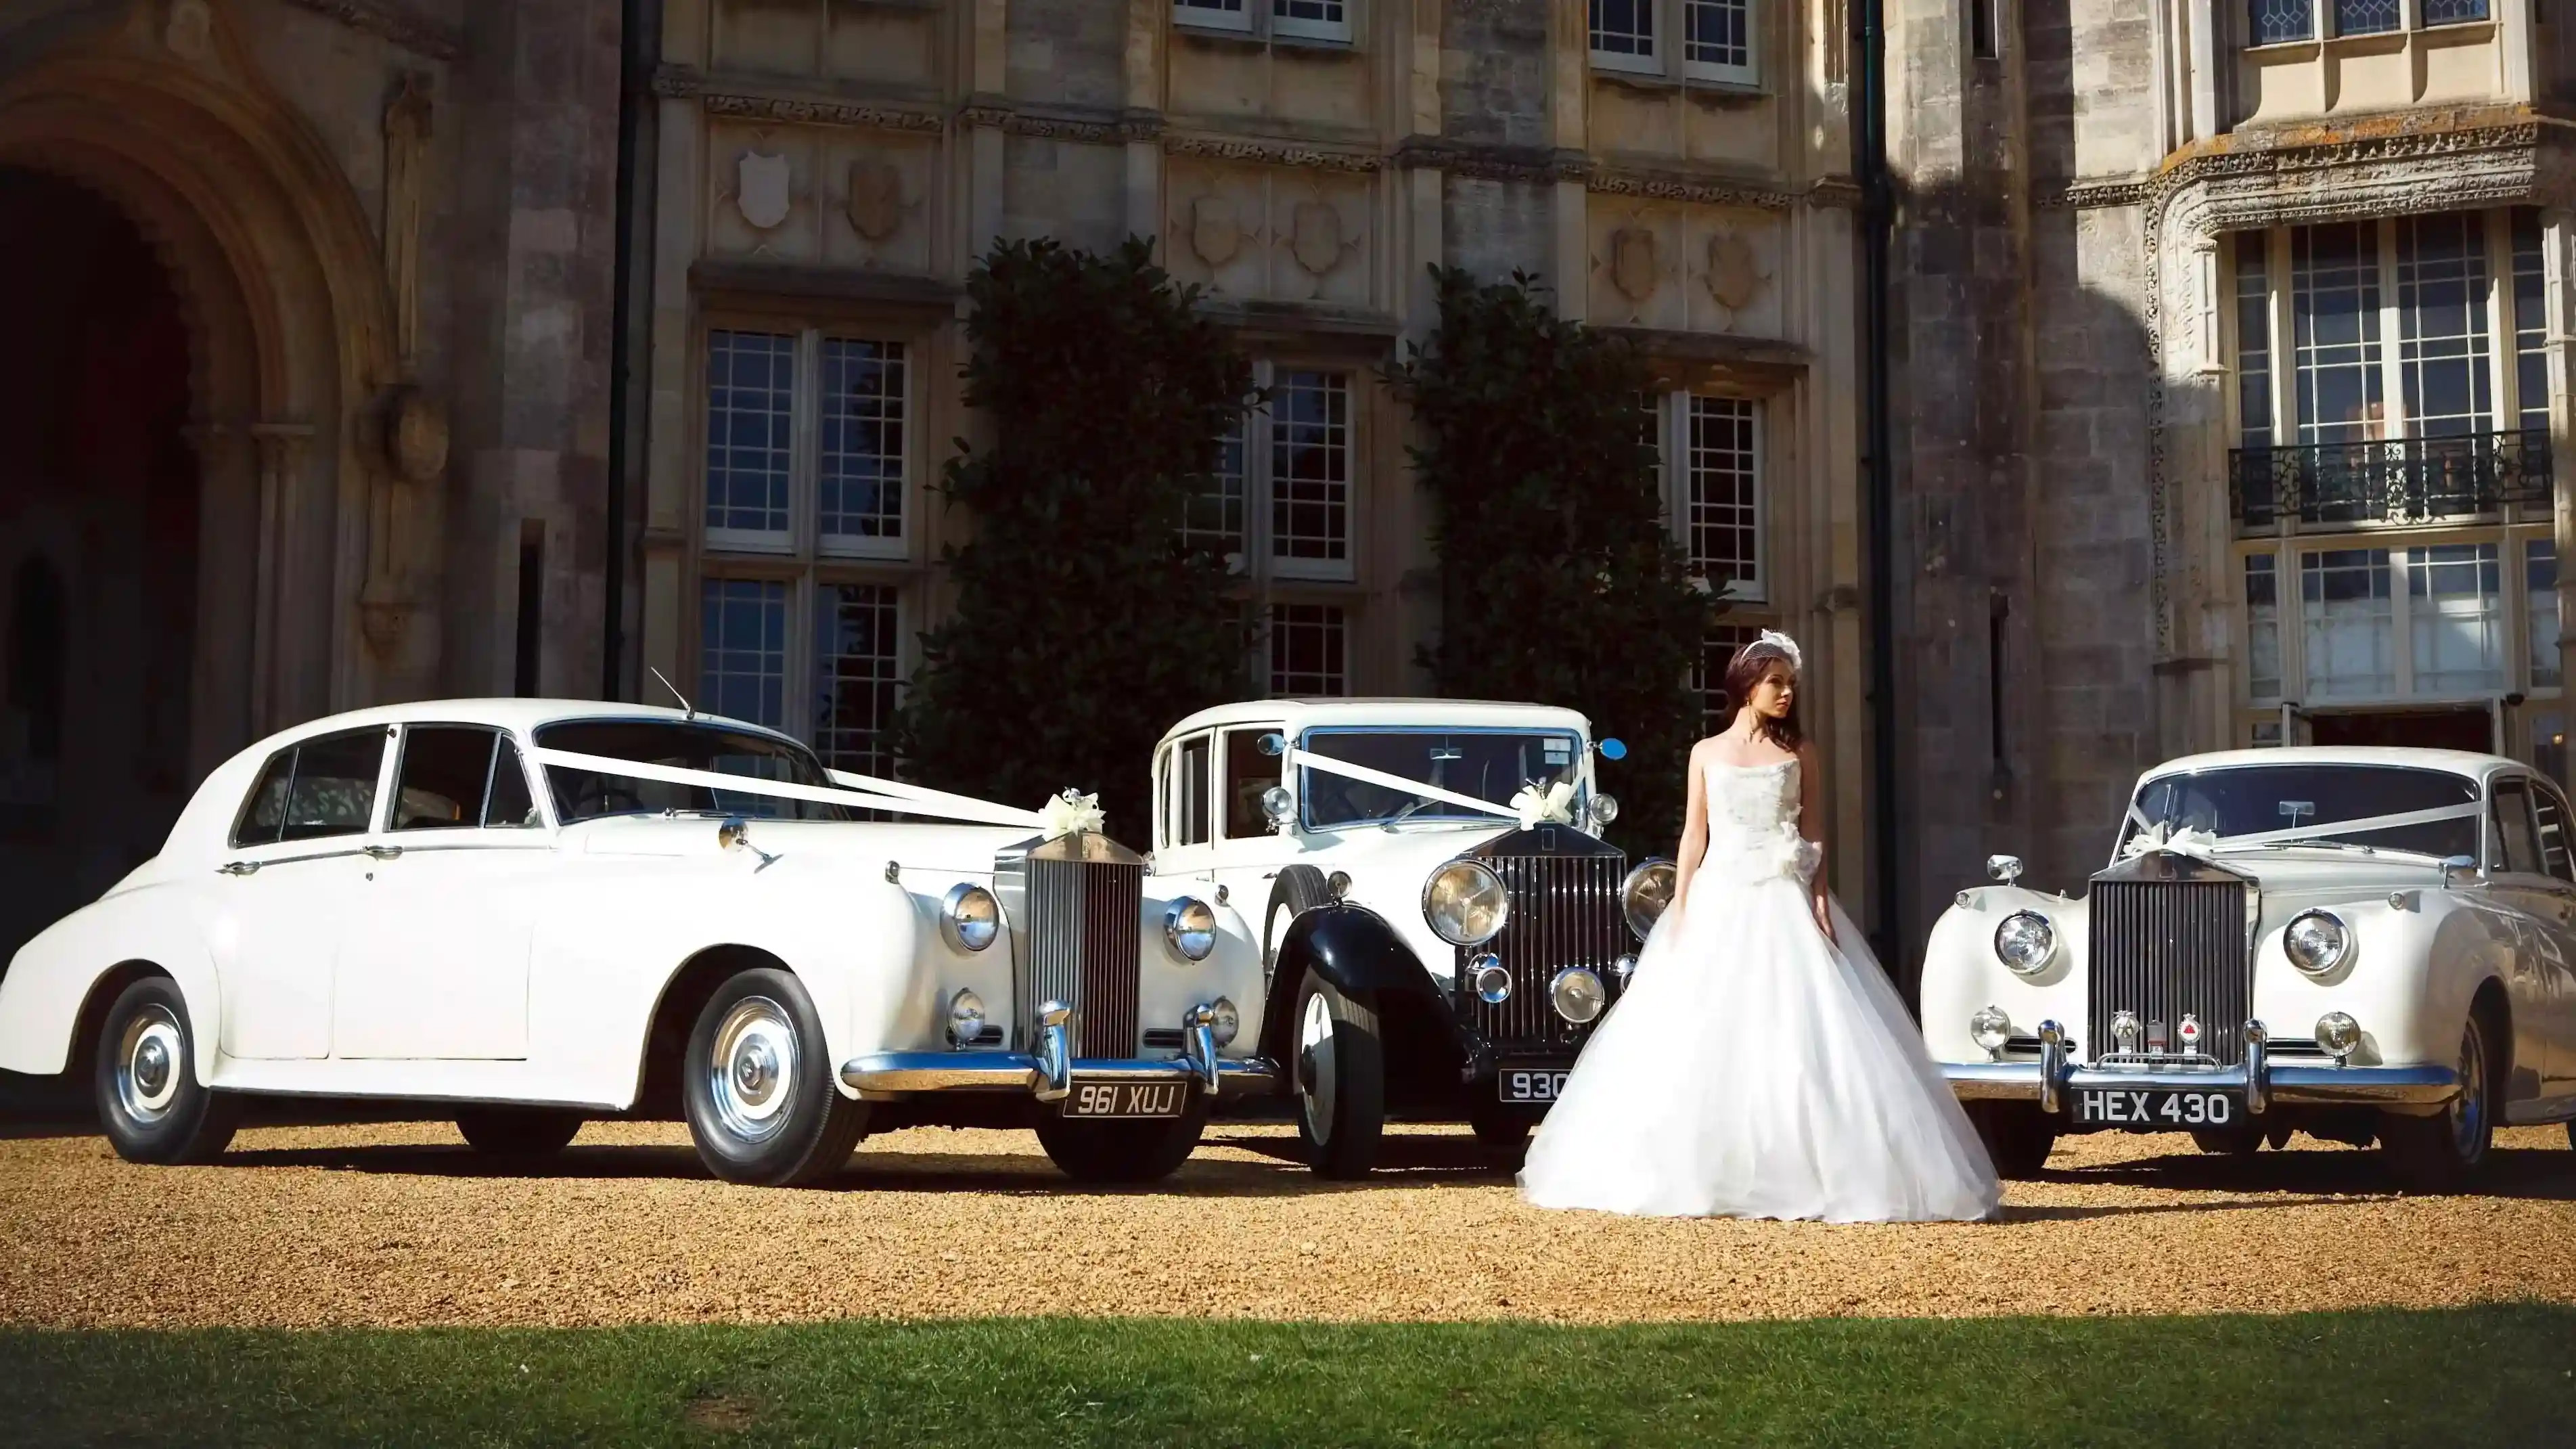 Selection of three classic and Vintage Rolls-Royce in White with Bride wearing a white wedding dress standing in the middle of the vehicles. Background is a popular wedding venue in the style of a castle in Peterborough.